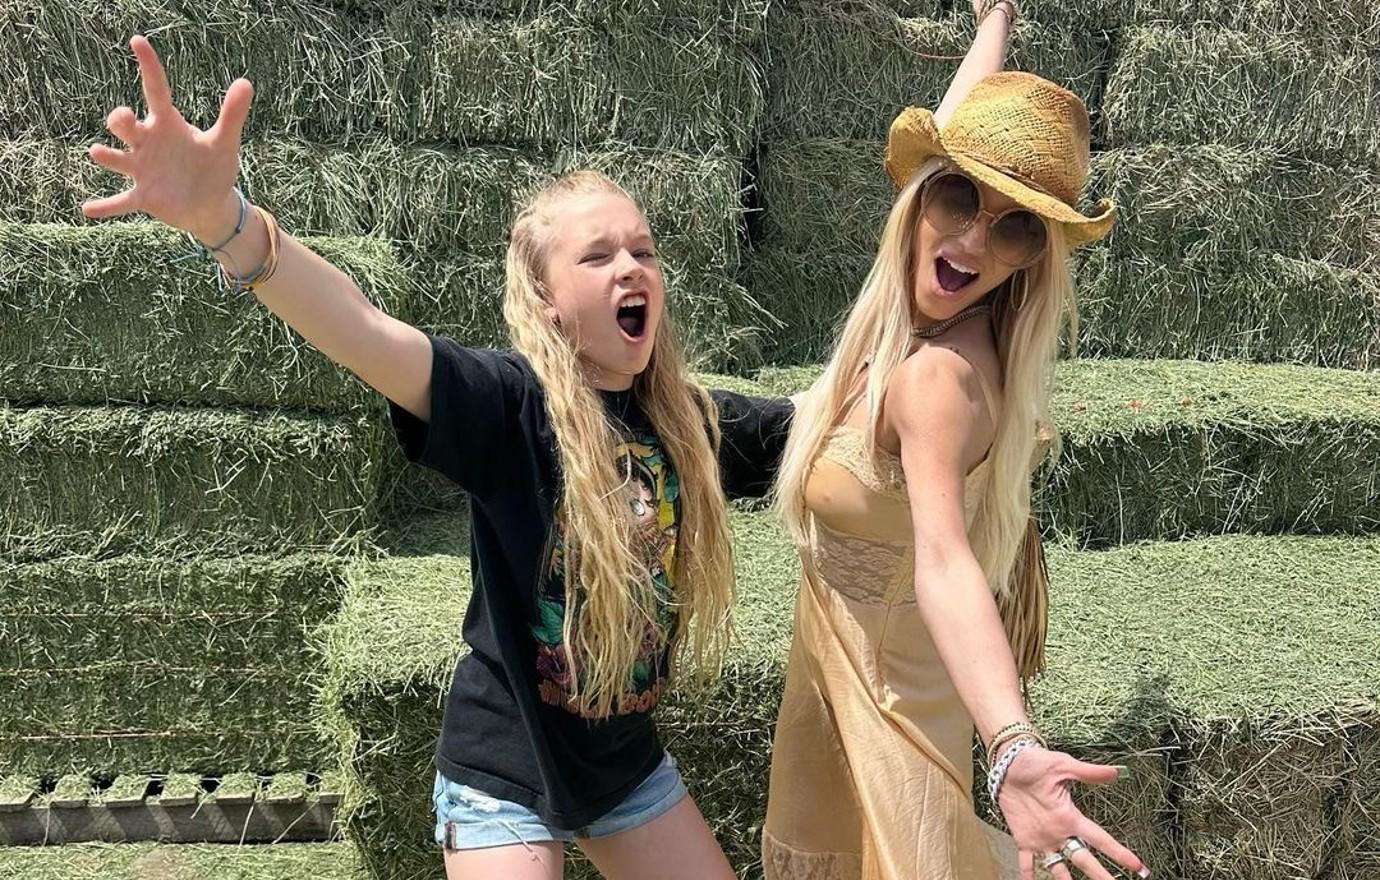 Jessica Simpson Gifts Daughter Maxi Louis Vuitton Bag, Gets Backlash